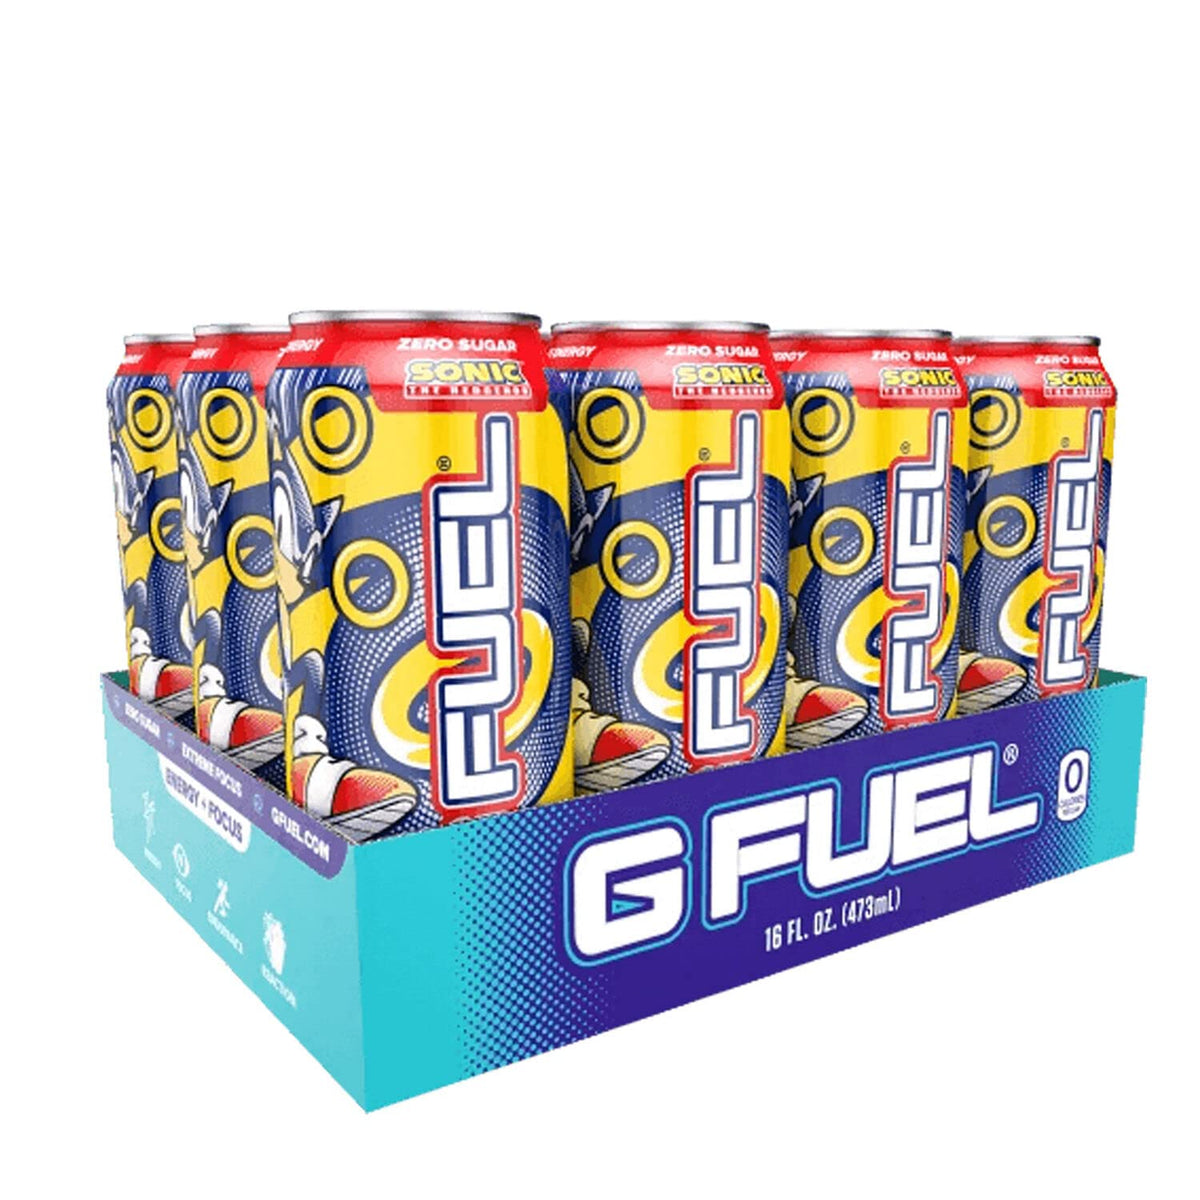 G Fuel Sonic Energy Drink, Sugar Free, Healthy Drinks, Zero Calorie, 300 mg Caffeine per Carbonated Can, Peach Ring Candy Flavor, Focus Amino, Vitamin + Antioxidants Blend - 12 Pack